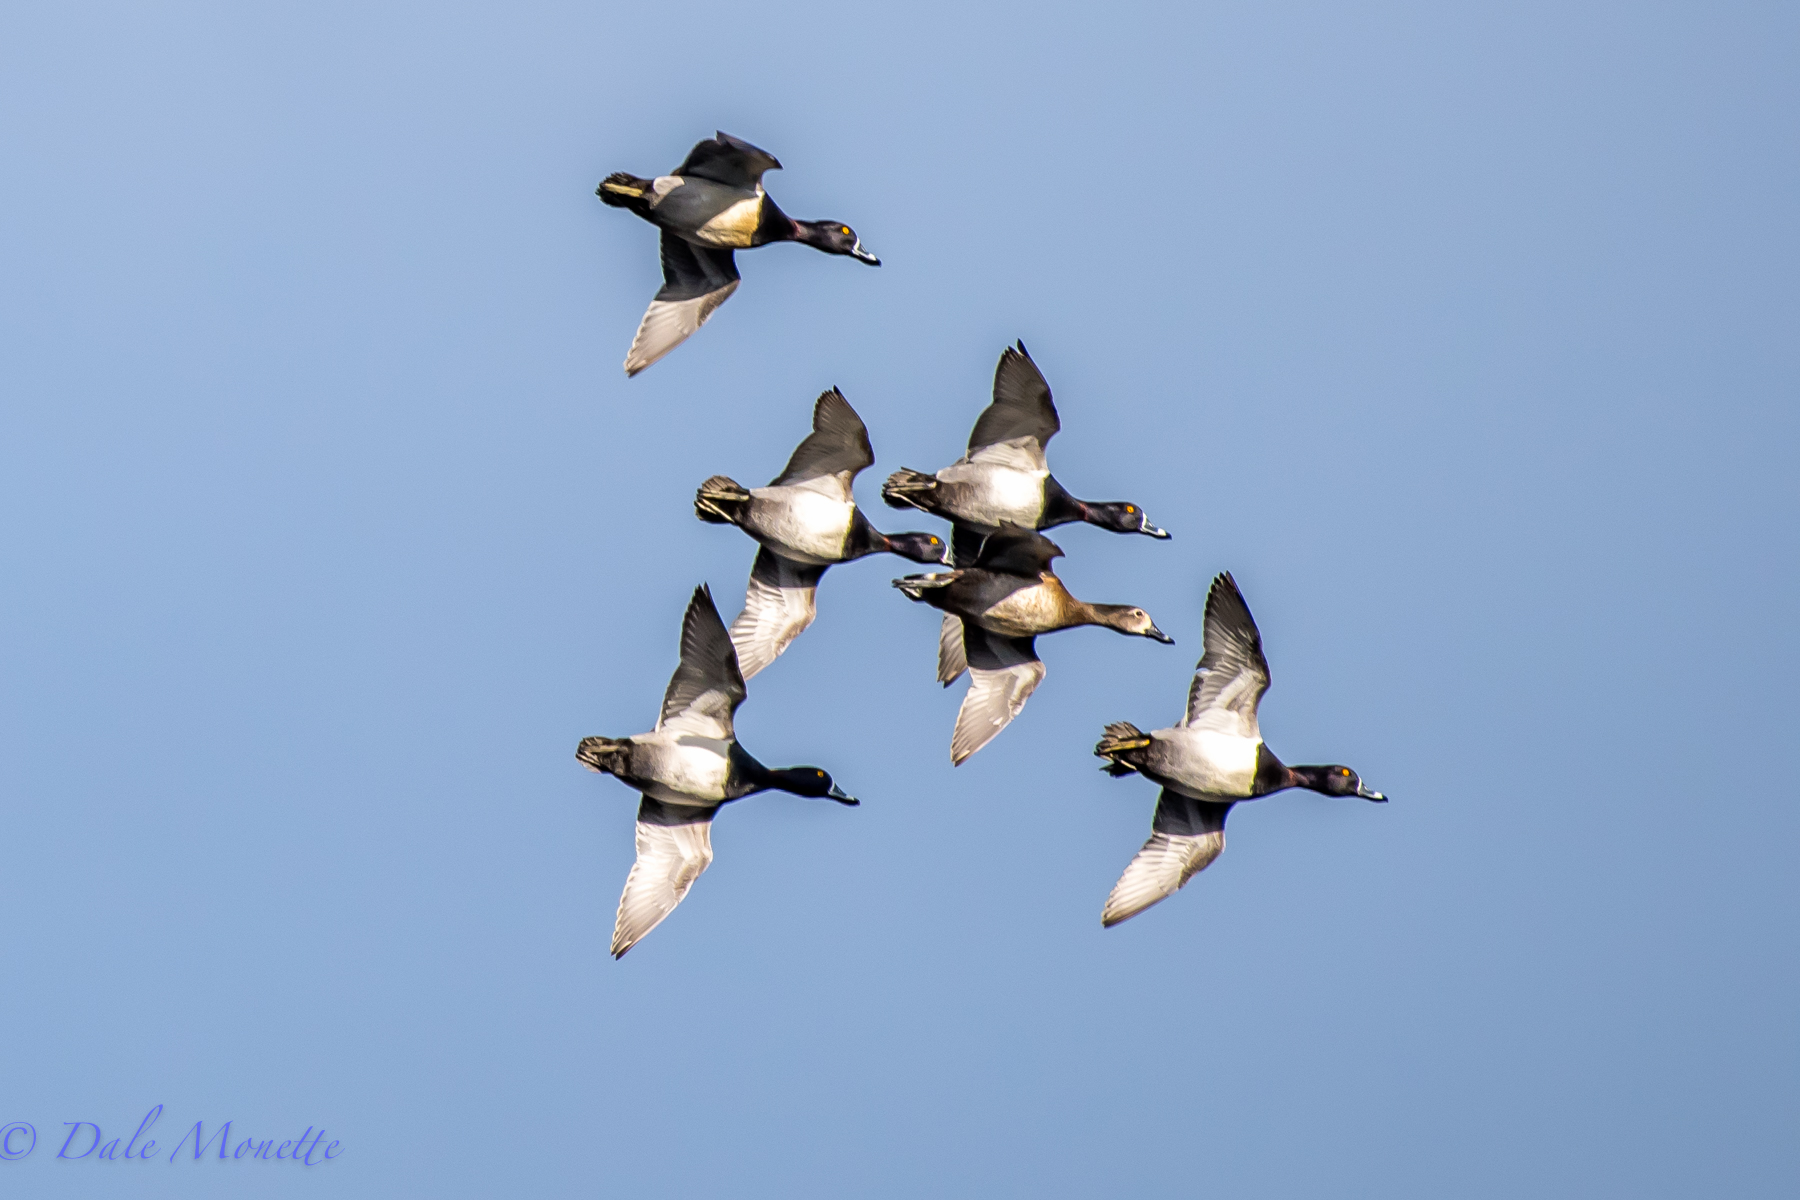   "Look, up in the air, Its the Navy's Blue" .... err &nbsp;ring necked ducks! &nbsp;They are all over the place this morning. &nbsp;They are very common during migration both in the spring and fall, but do not nest here. &nbsp;In this photo you can 